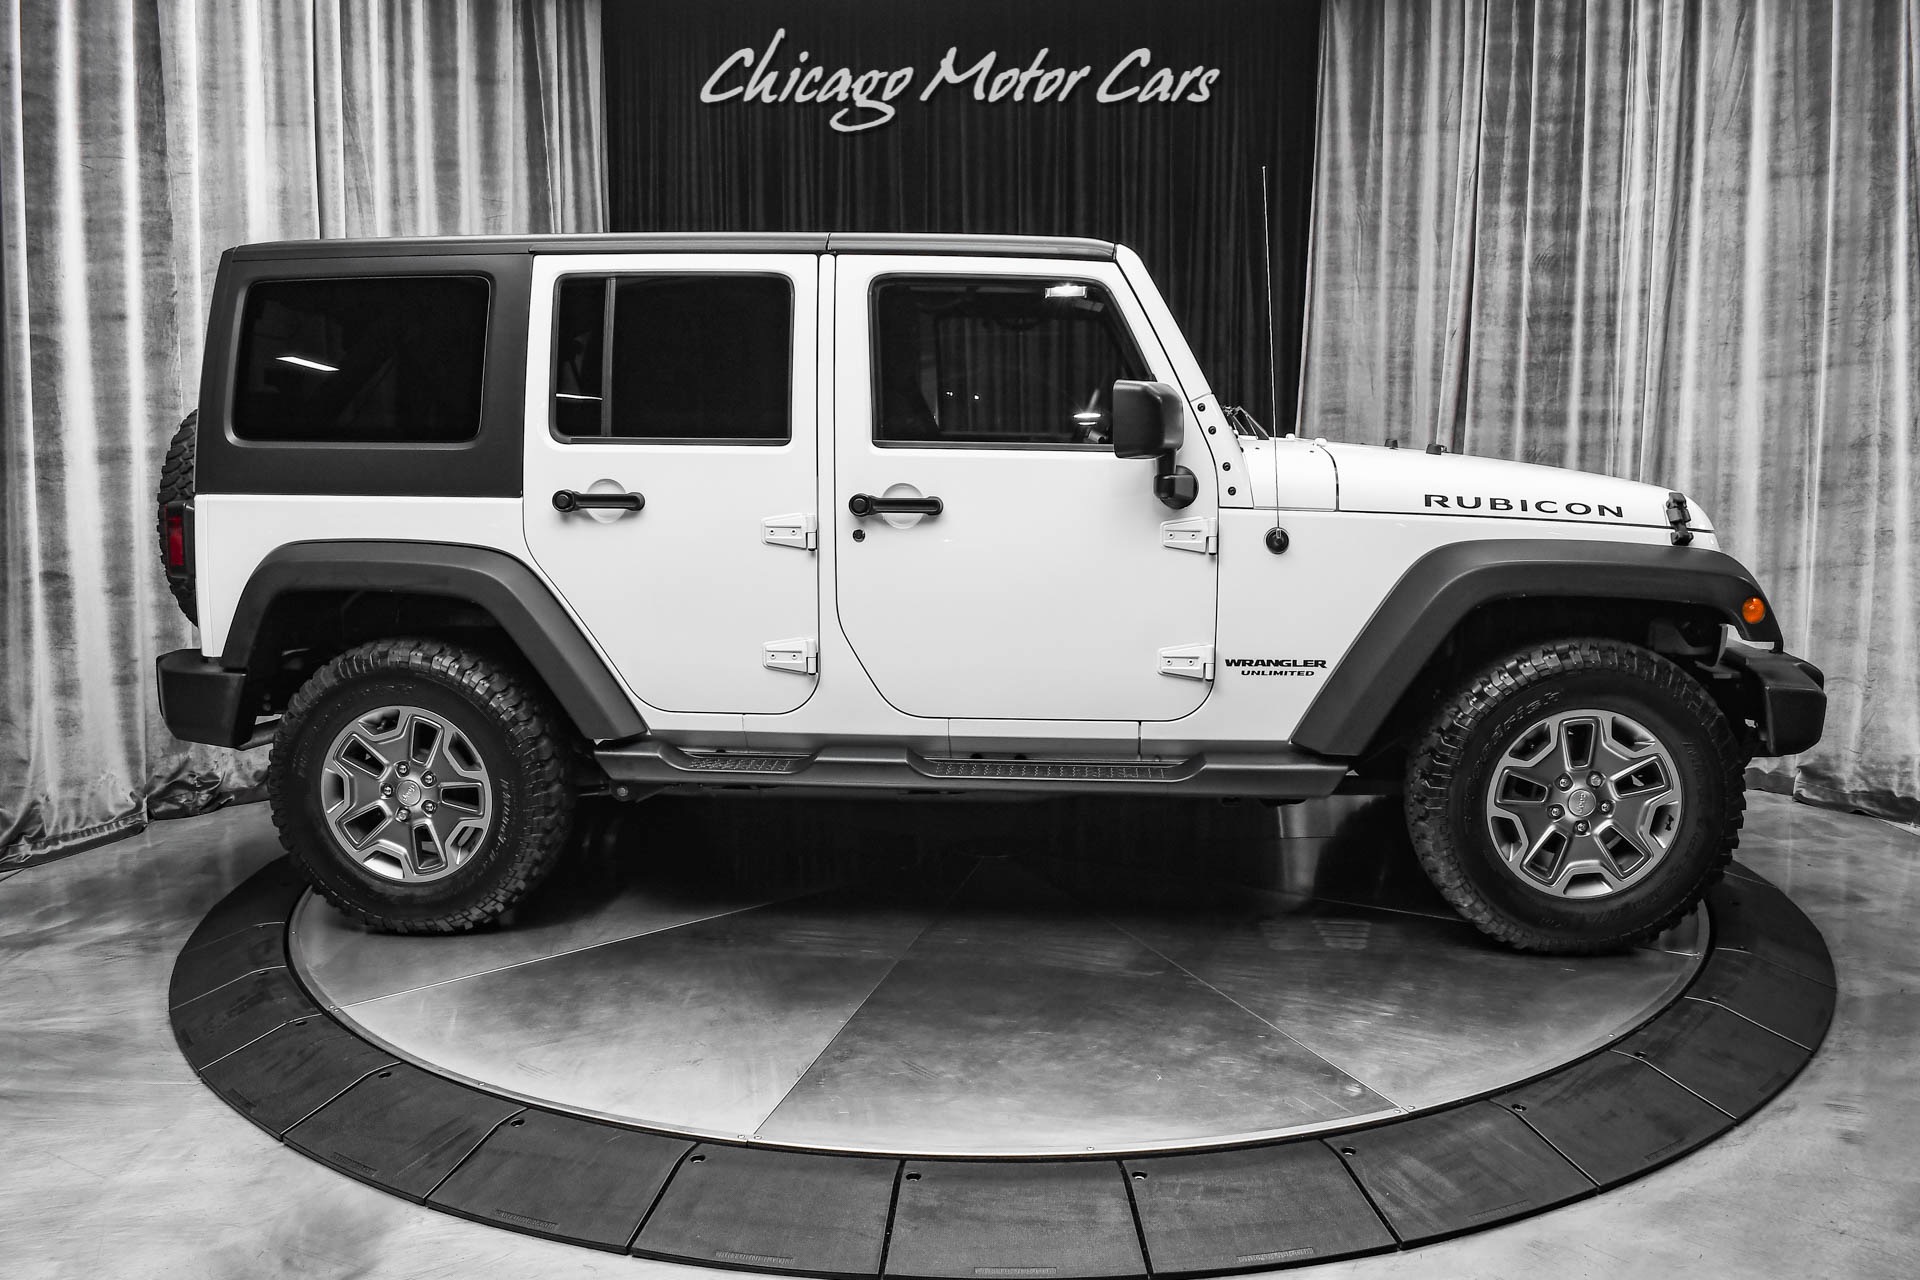 Used-2017-Jeep-Wrangler-Unlimited-Rubicon-4x4-LOW-MILES-FREEDOM-TOP-EXCELLENT